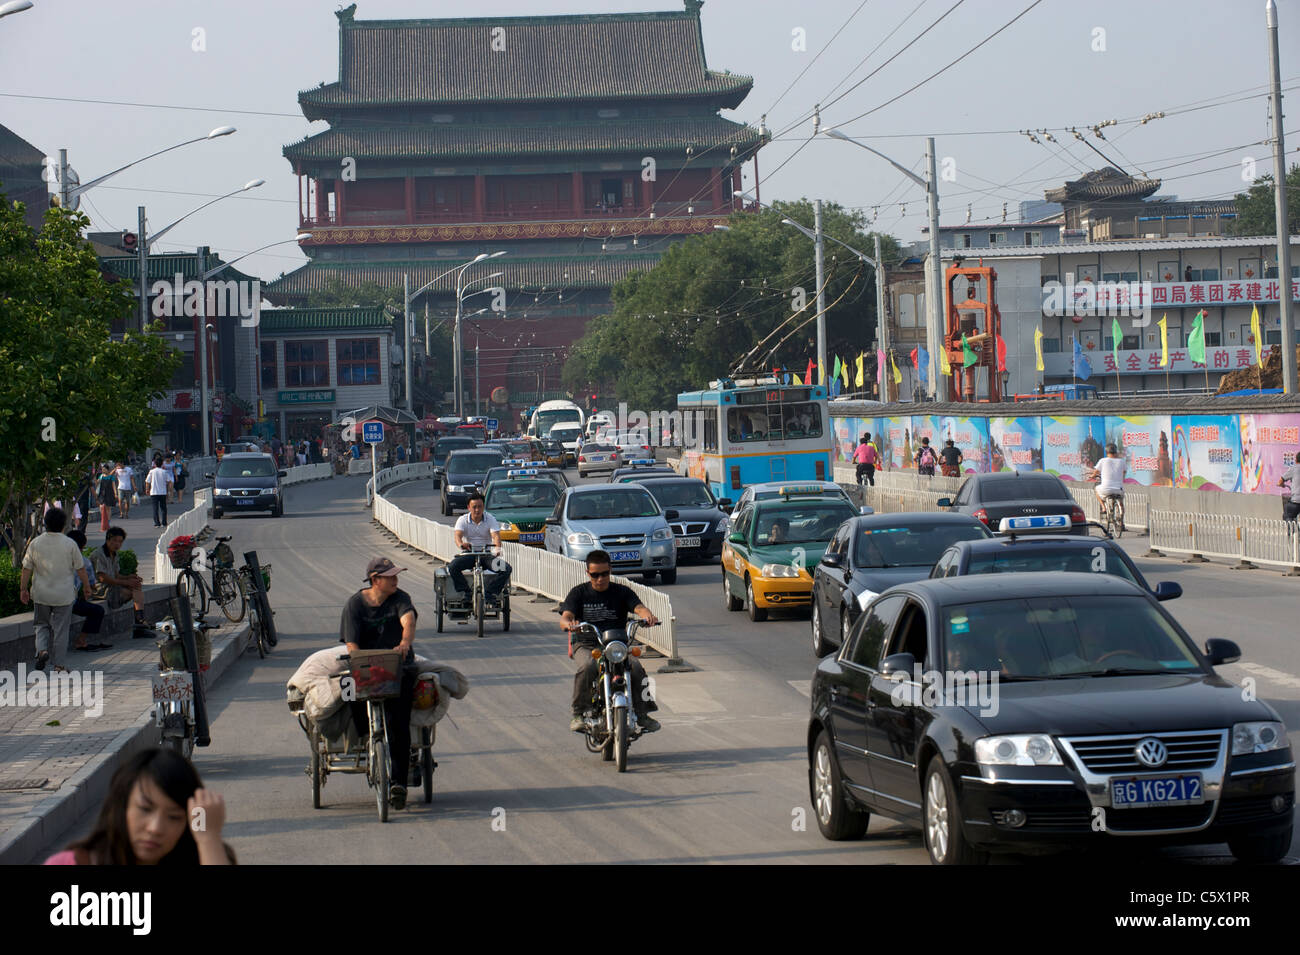 A general scene of Drum Tower area in Beijing, China.03-Aug-2011 Stock Photo